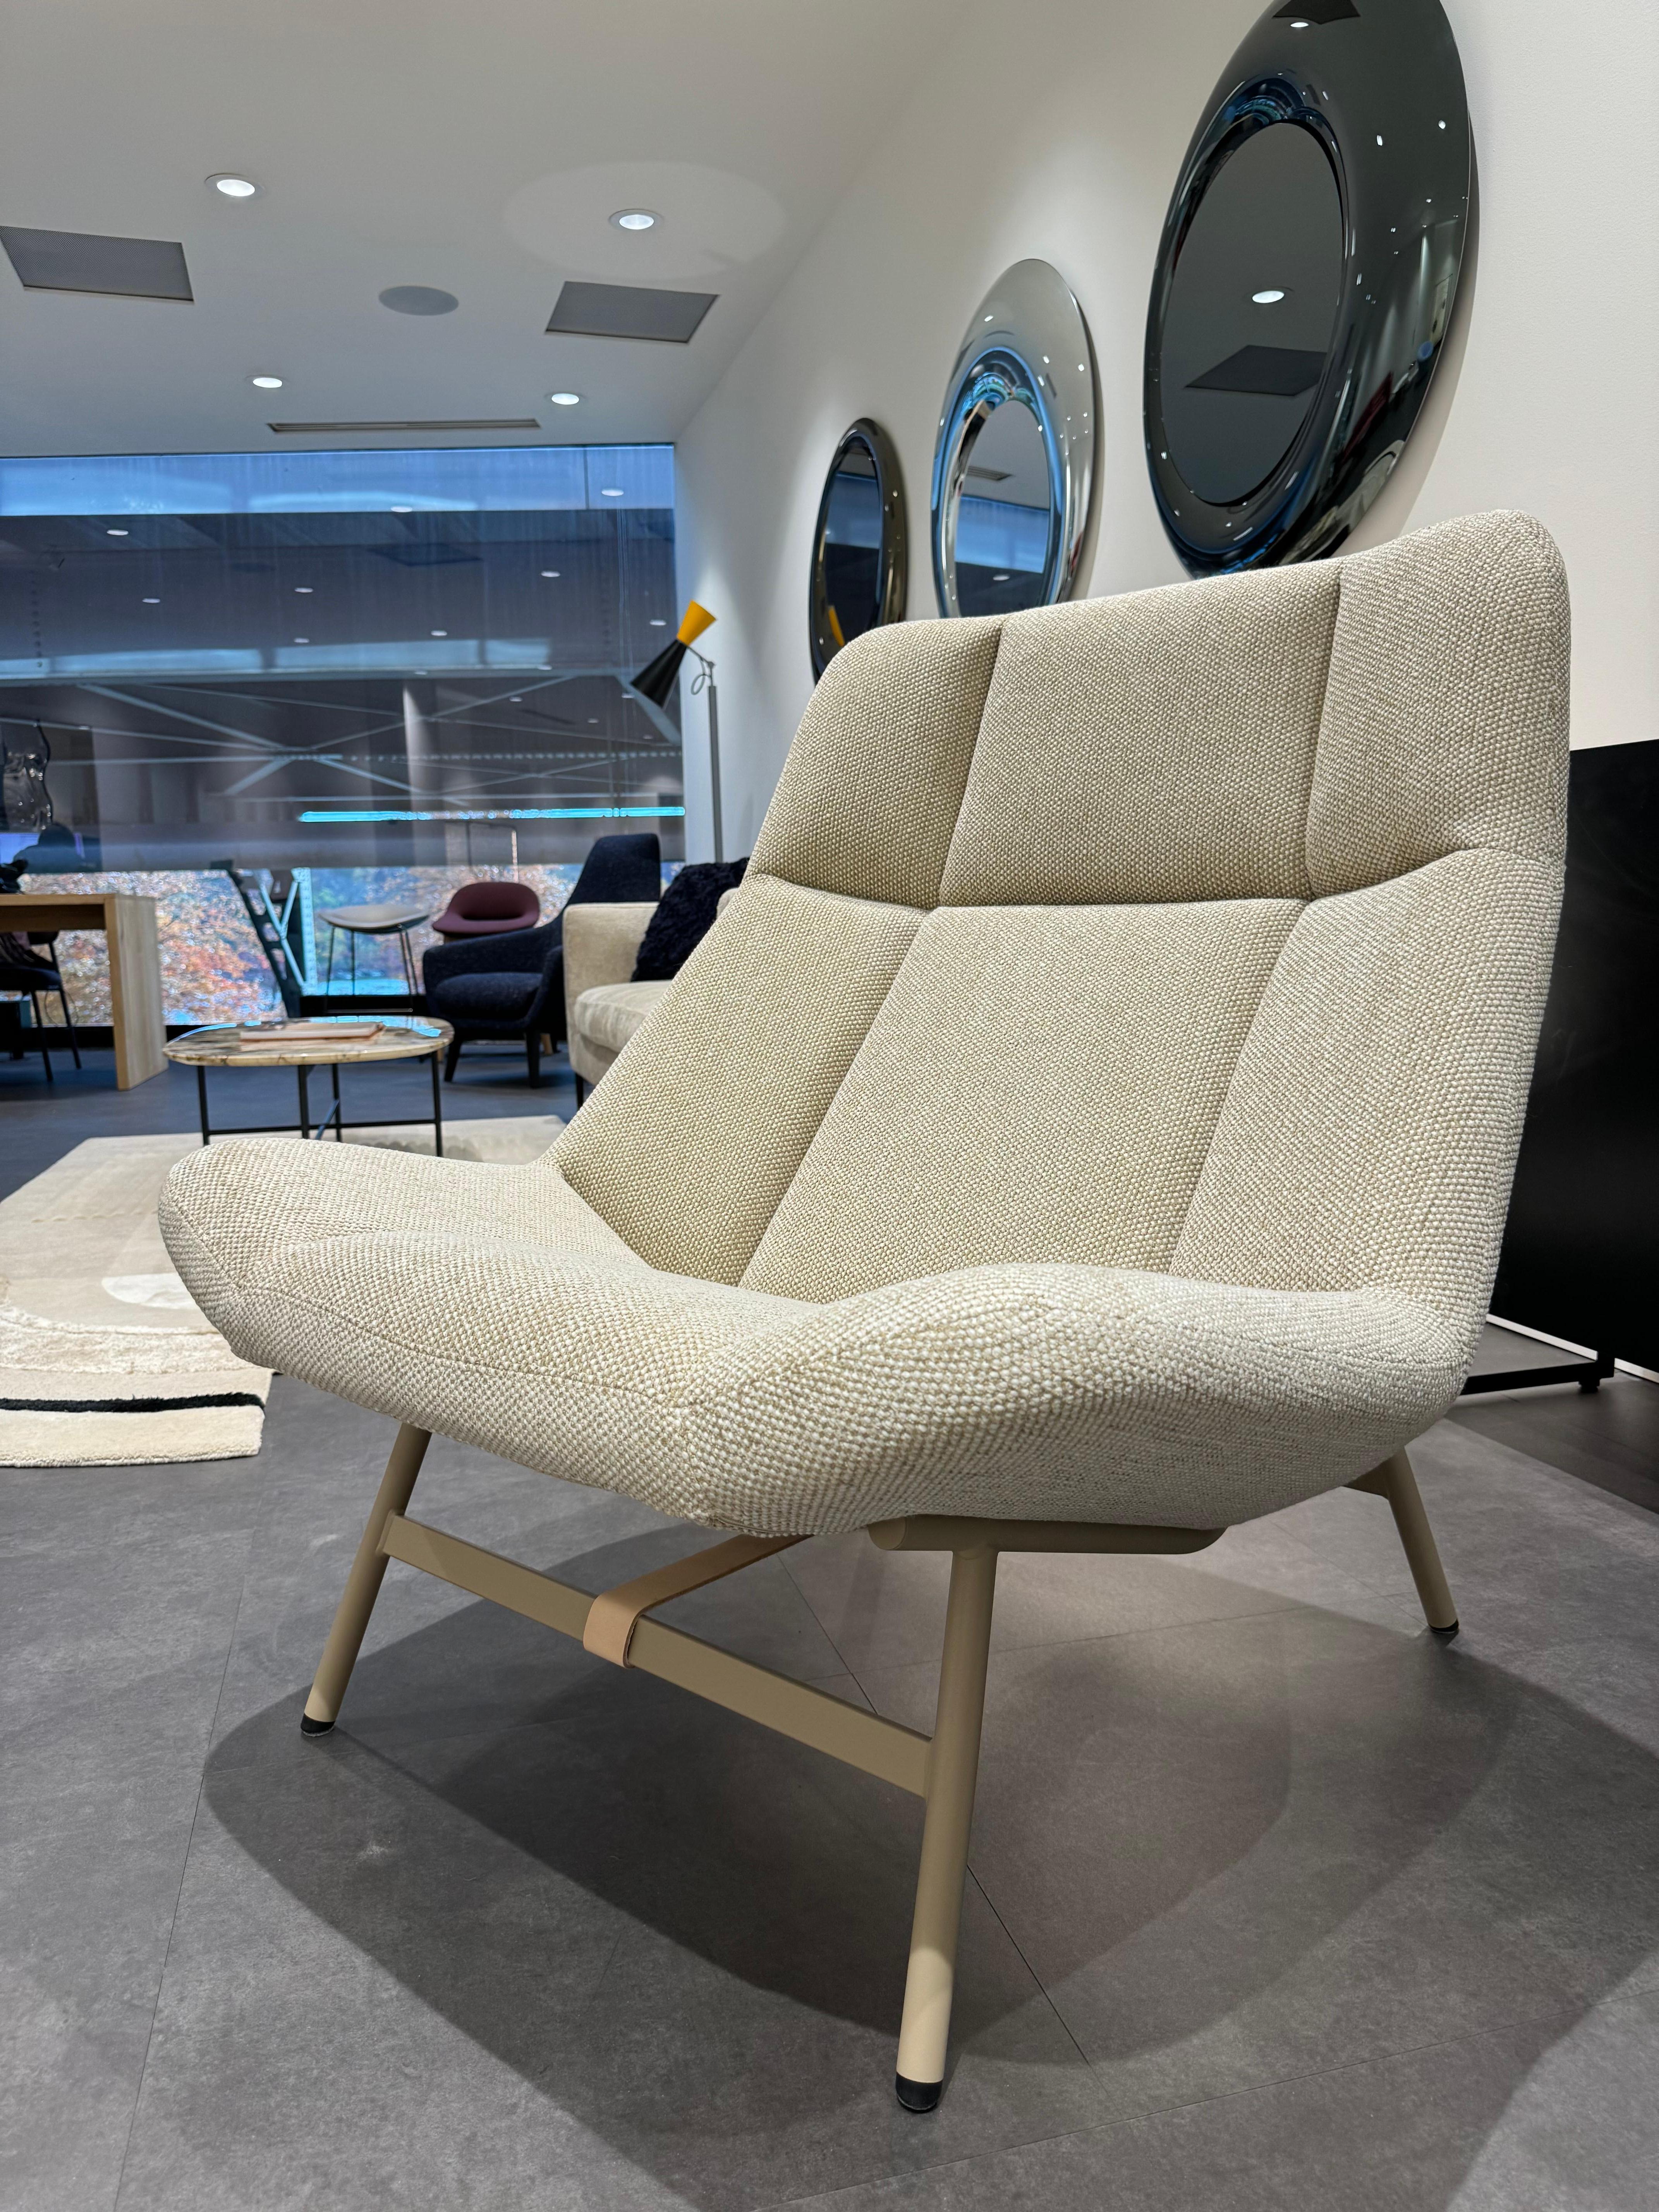 Soft Facet lounge chair
Upholstered in Safire (DD) 0014
- Powdercoat colour P33 / Grey Beige RAL
1019 (structure)

Design by Scholten & Baijings
Soft Facet is a comfortable, inviting lounge armchair with a distinctive richness of detail. Its open,